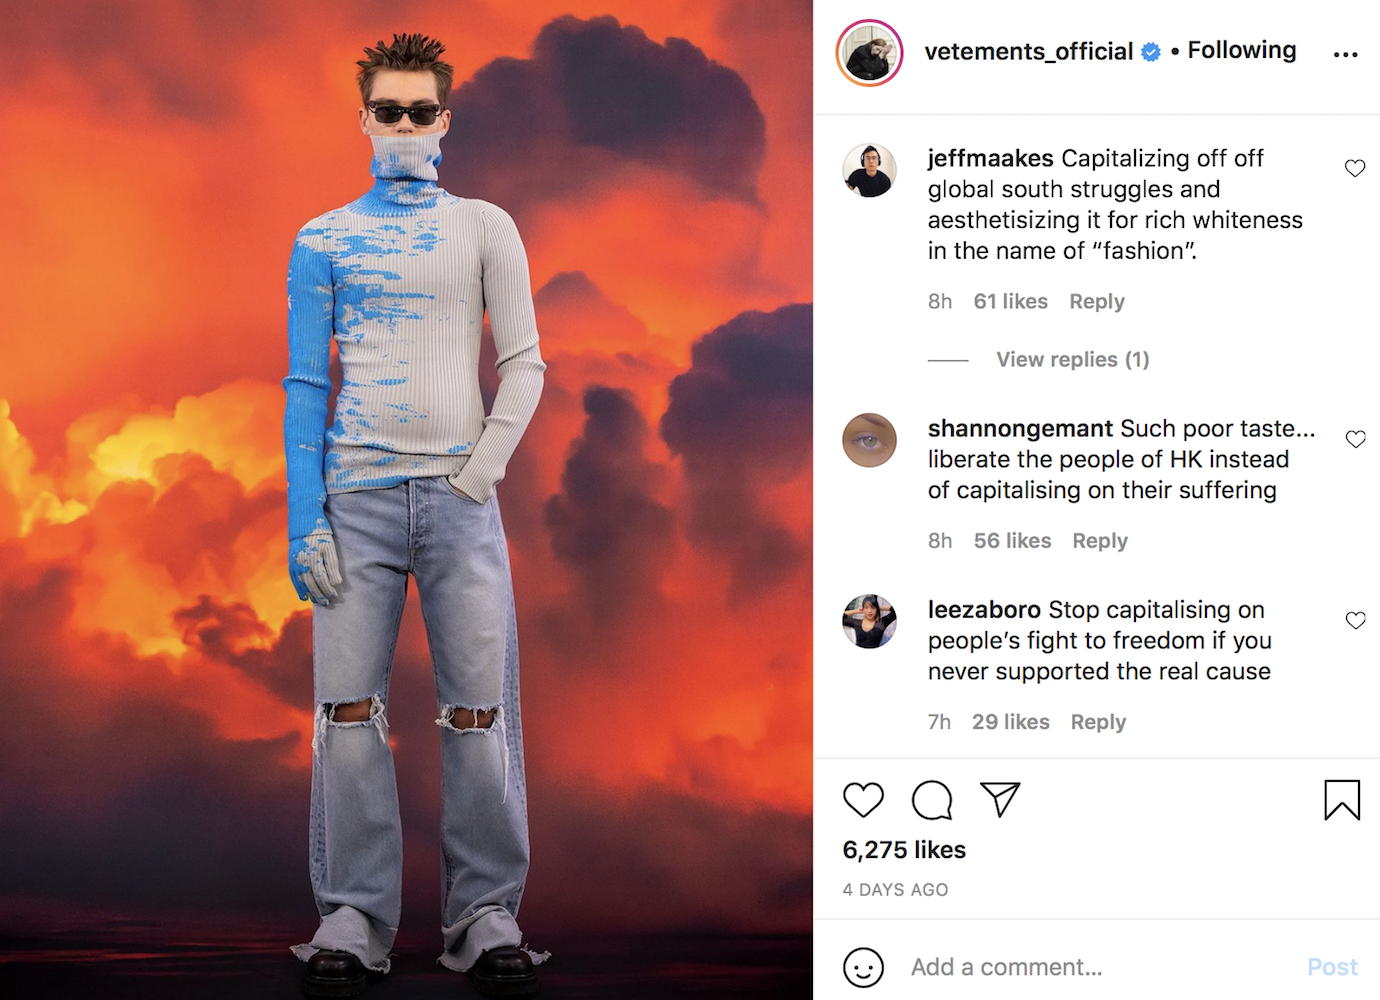 Vetements sparks controversy with ‘high-fashion take’ on Hong Kong protests